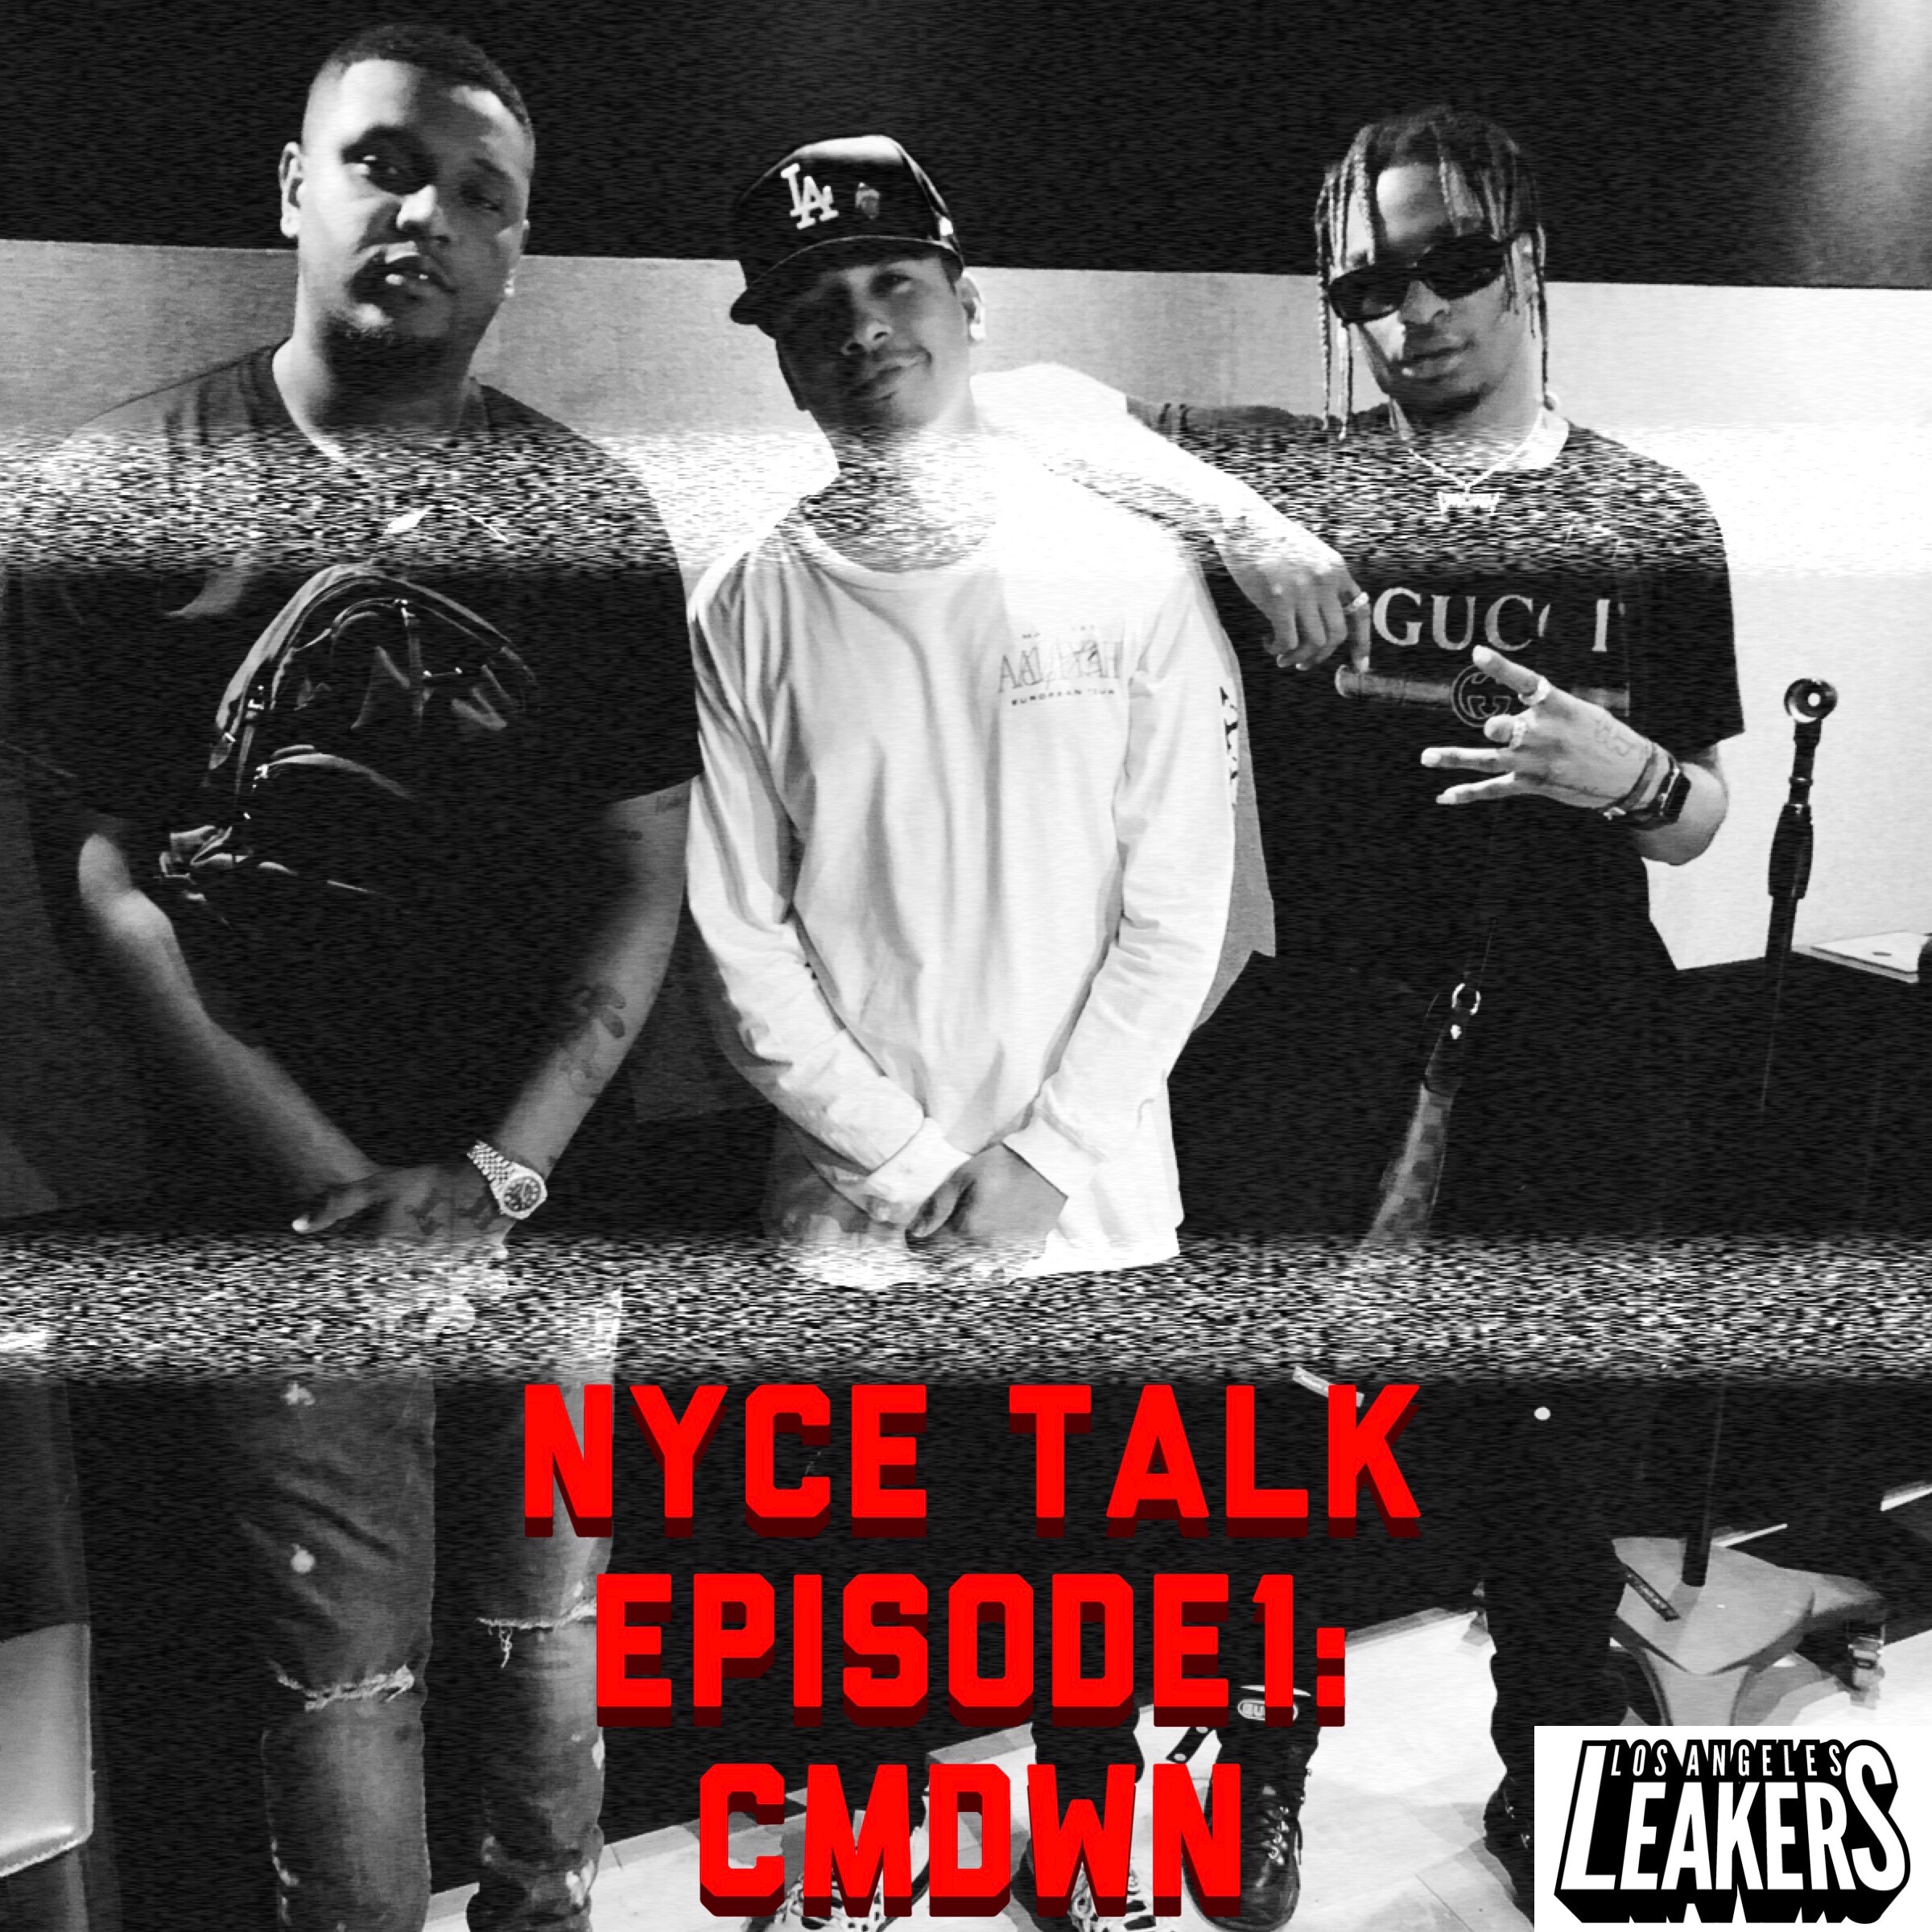 NYCE TALK: B-Nyce Sits Down With Toronto’s CMDWN To Talk ‘Atlanada 2’, Drake Showing Love, Linking W/ Chief Keef & More [WATCH]